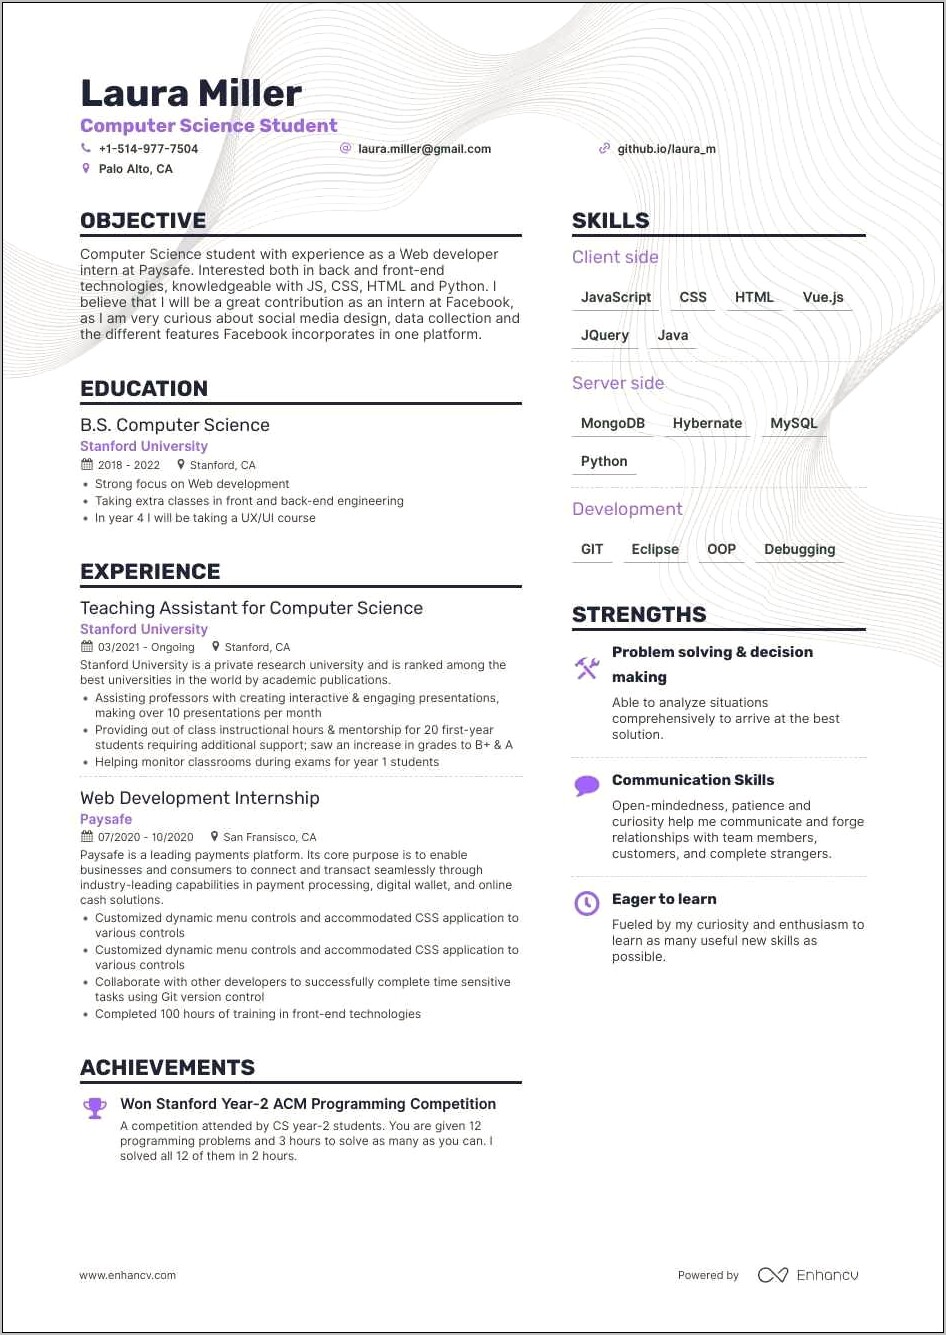 Is A Competition Considered Experience For A Resume